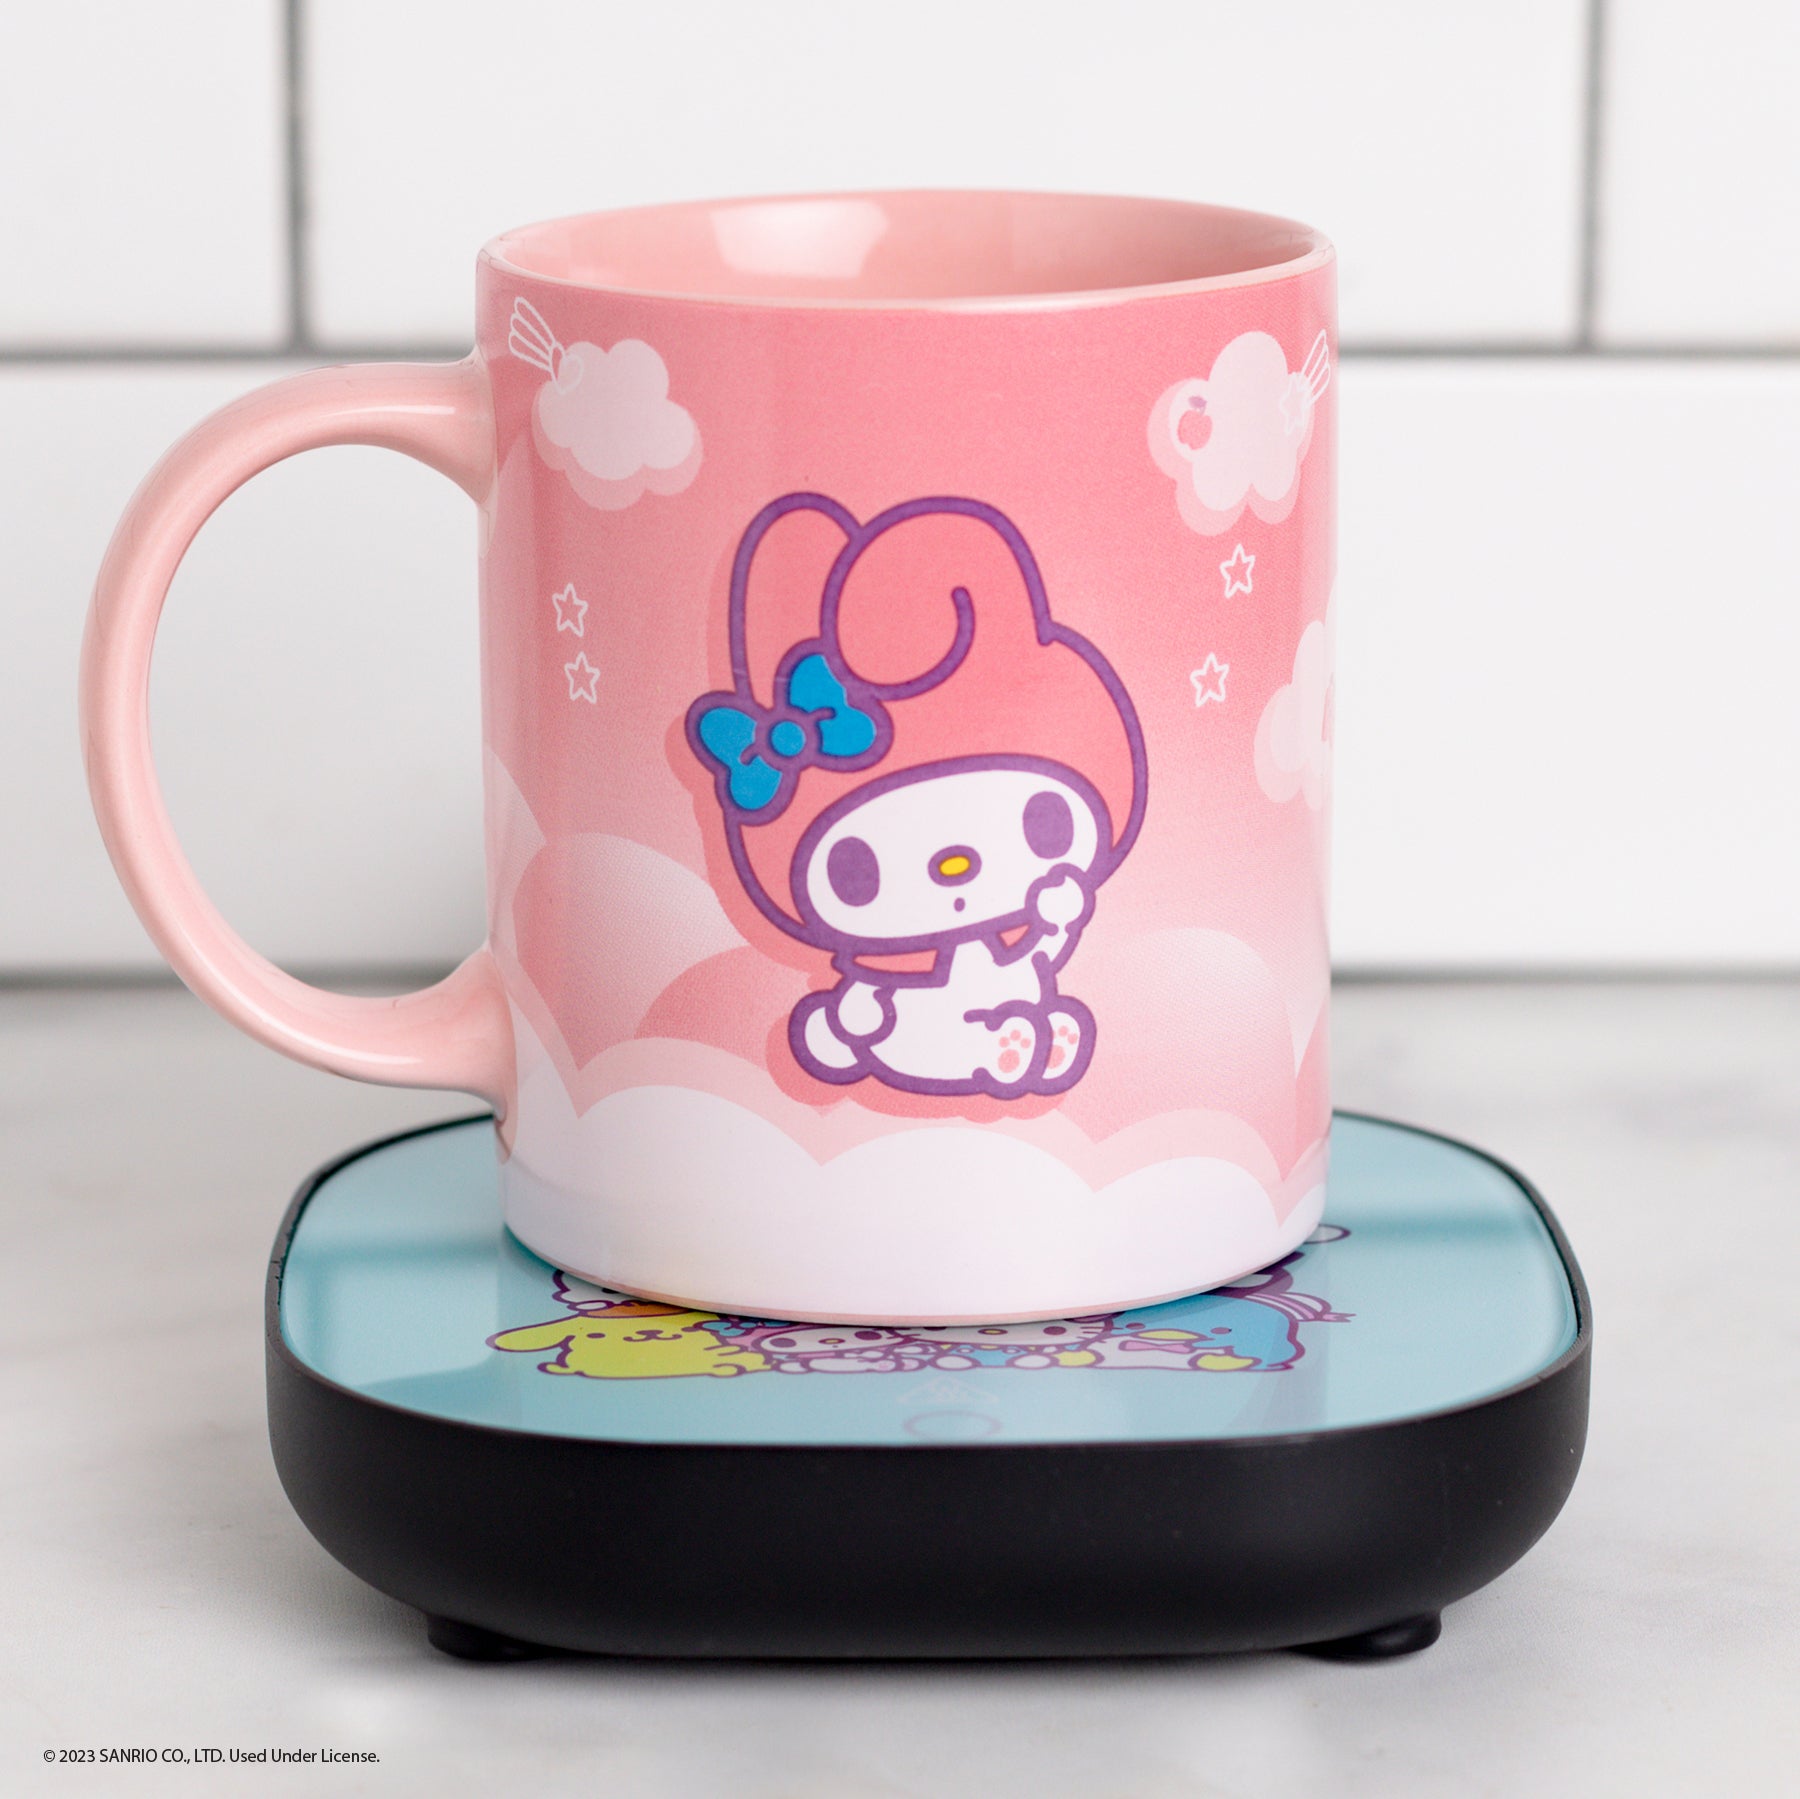 Uncanny Brands Hello Kitty® 2qt Slow Cooker